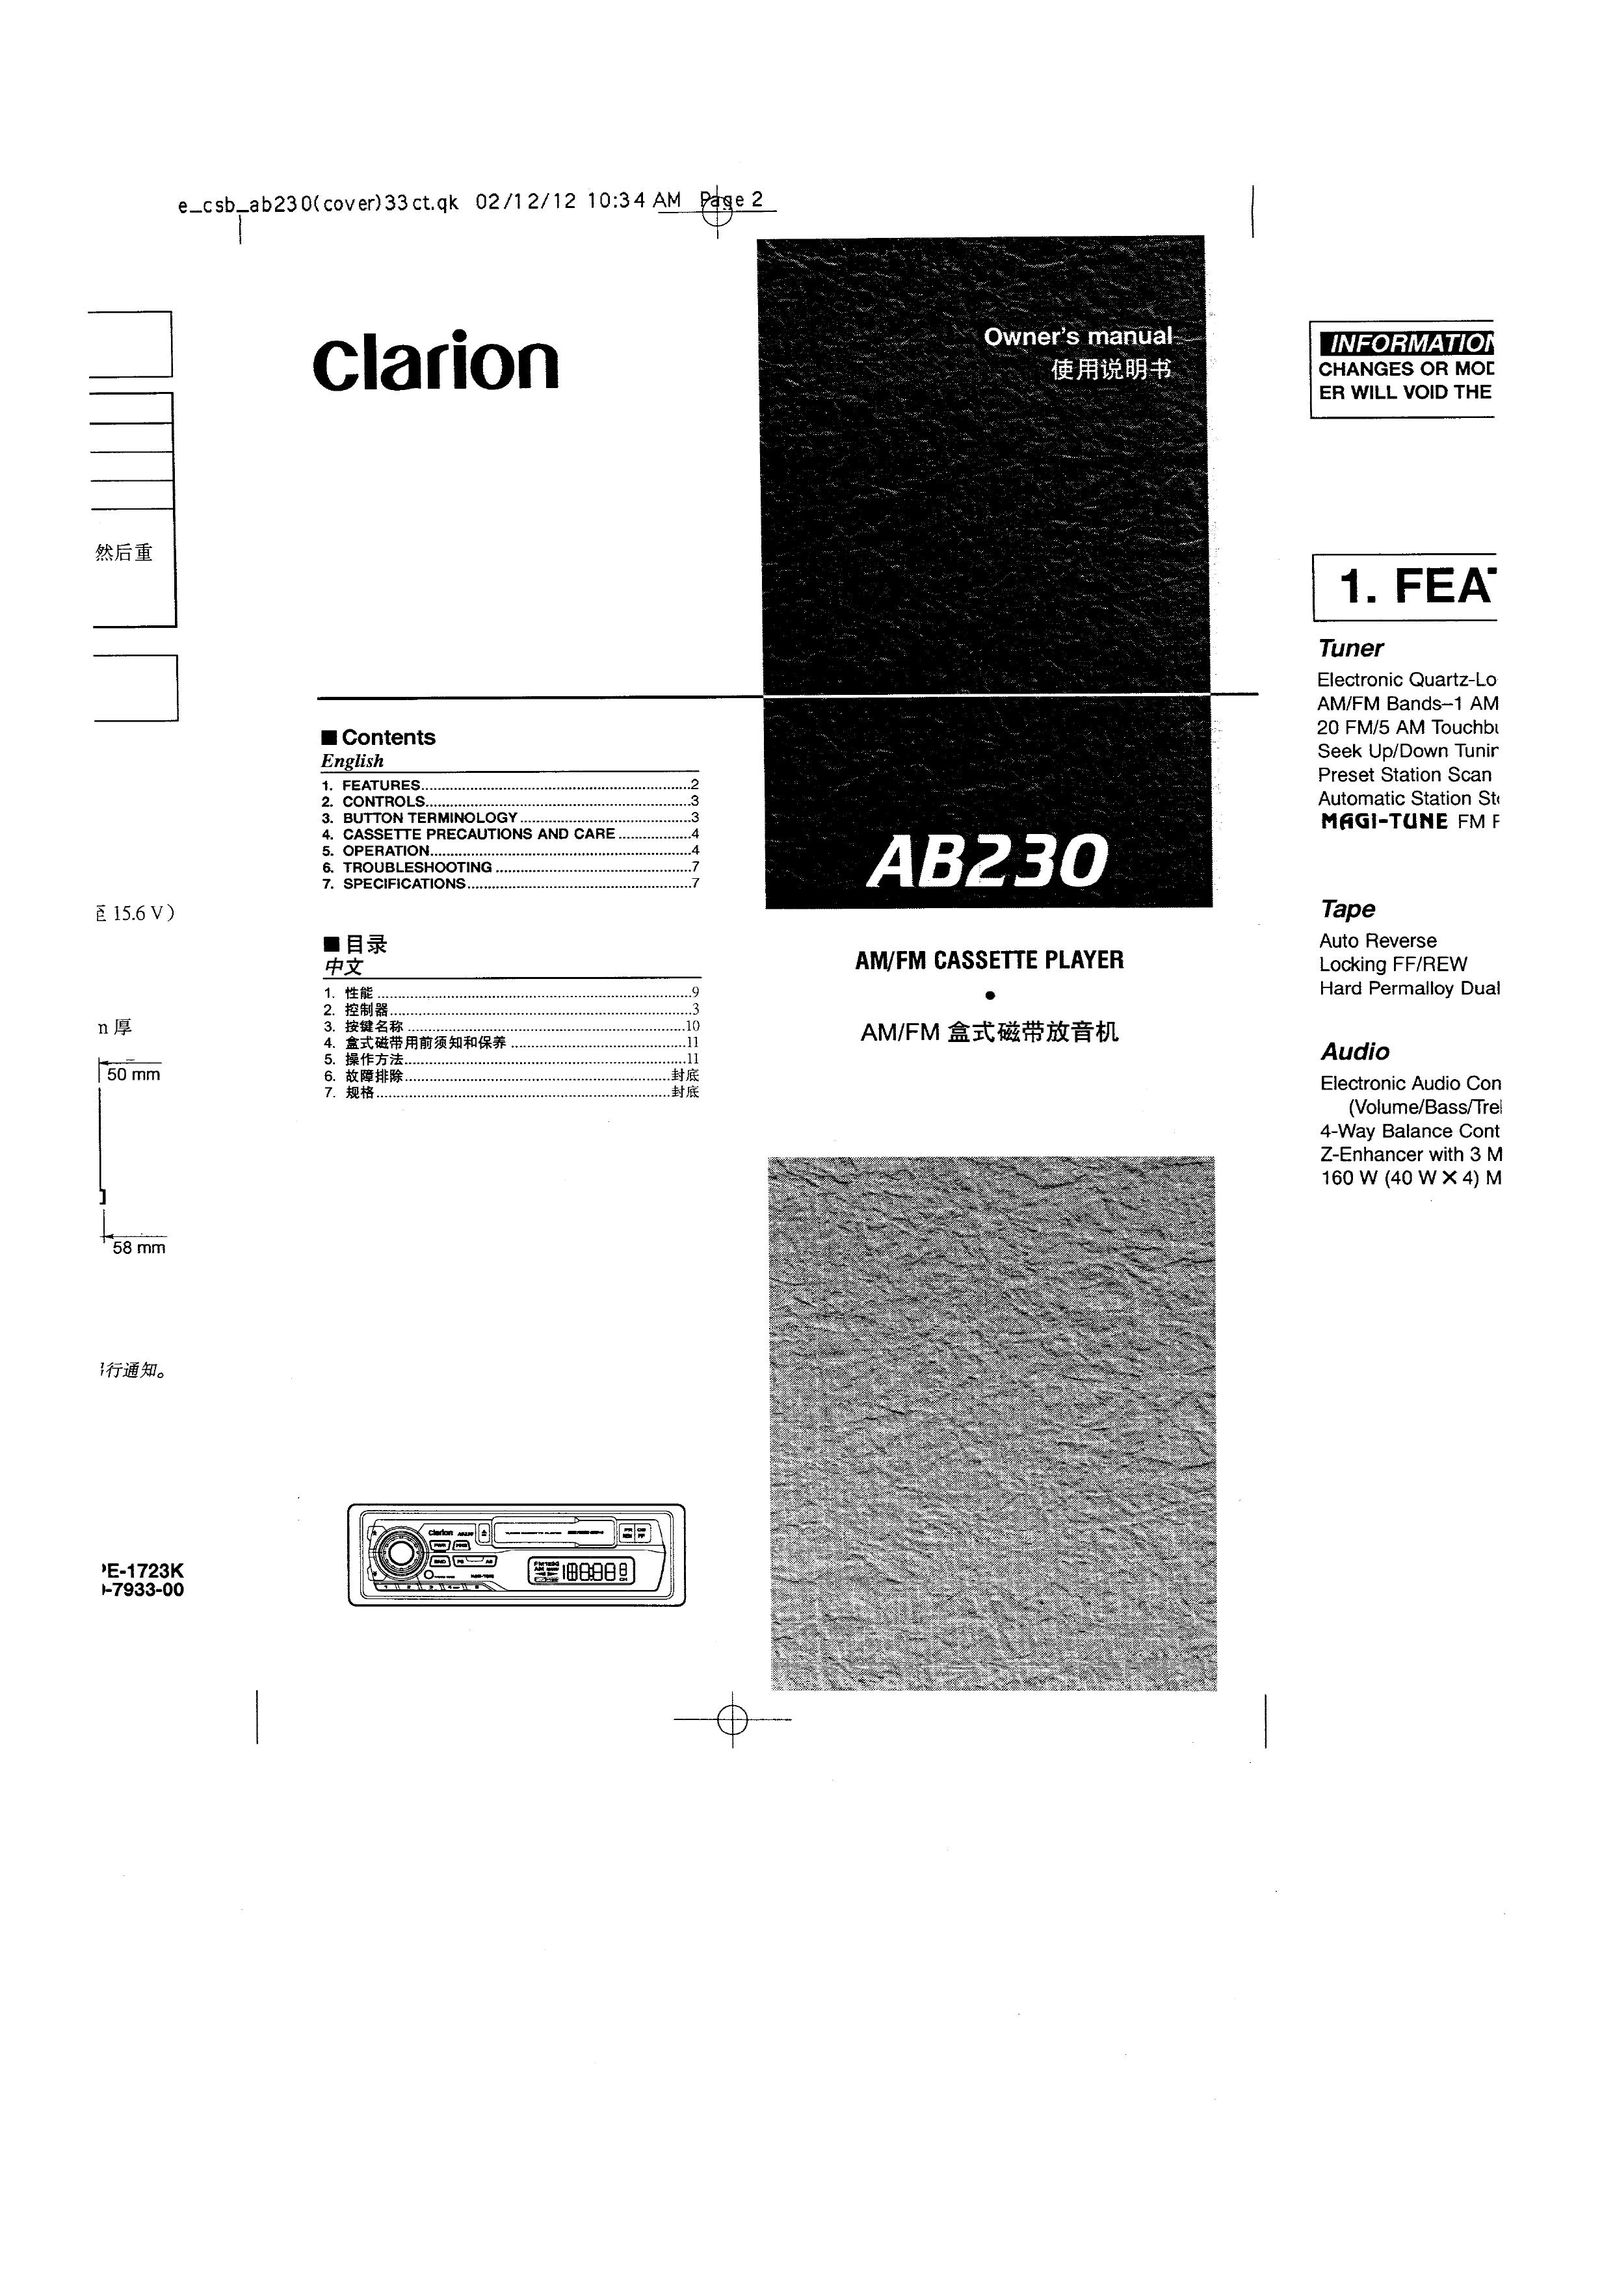 Clarion AB230 Cassette Player User Manual (Page 1)